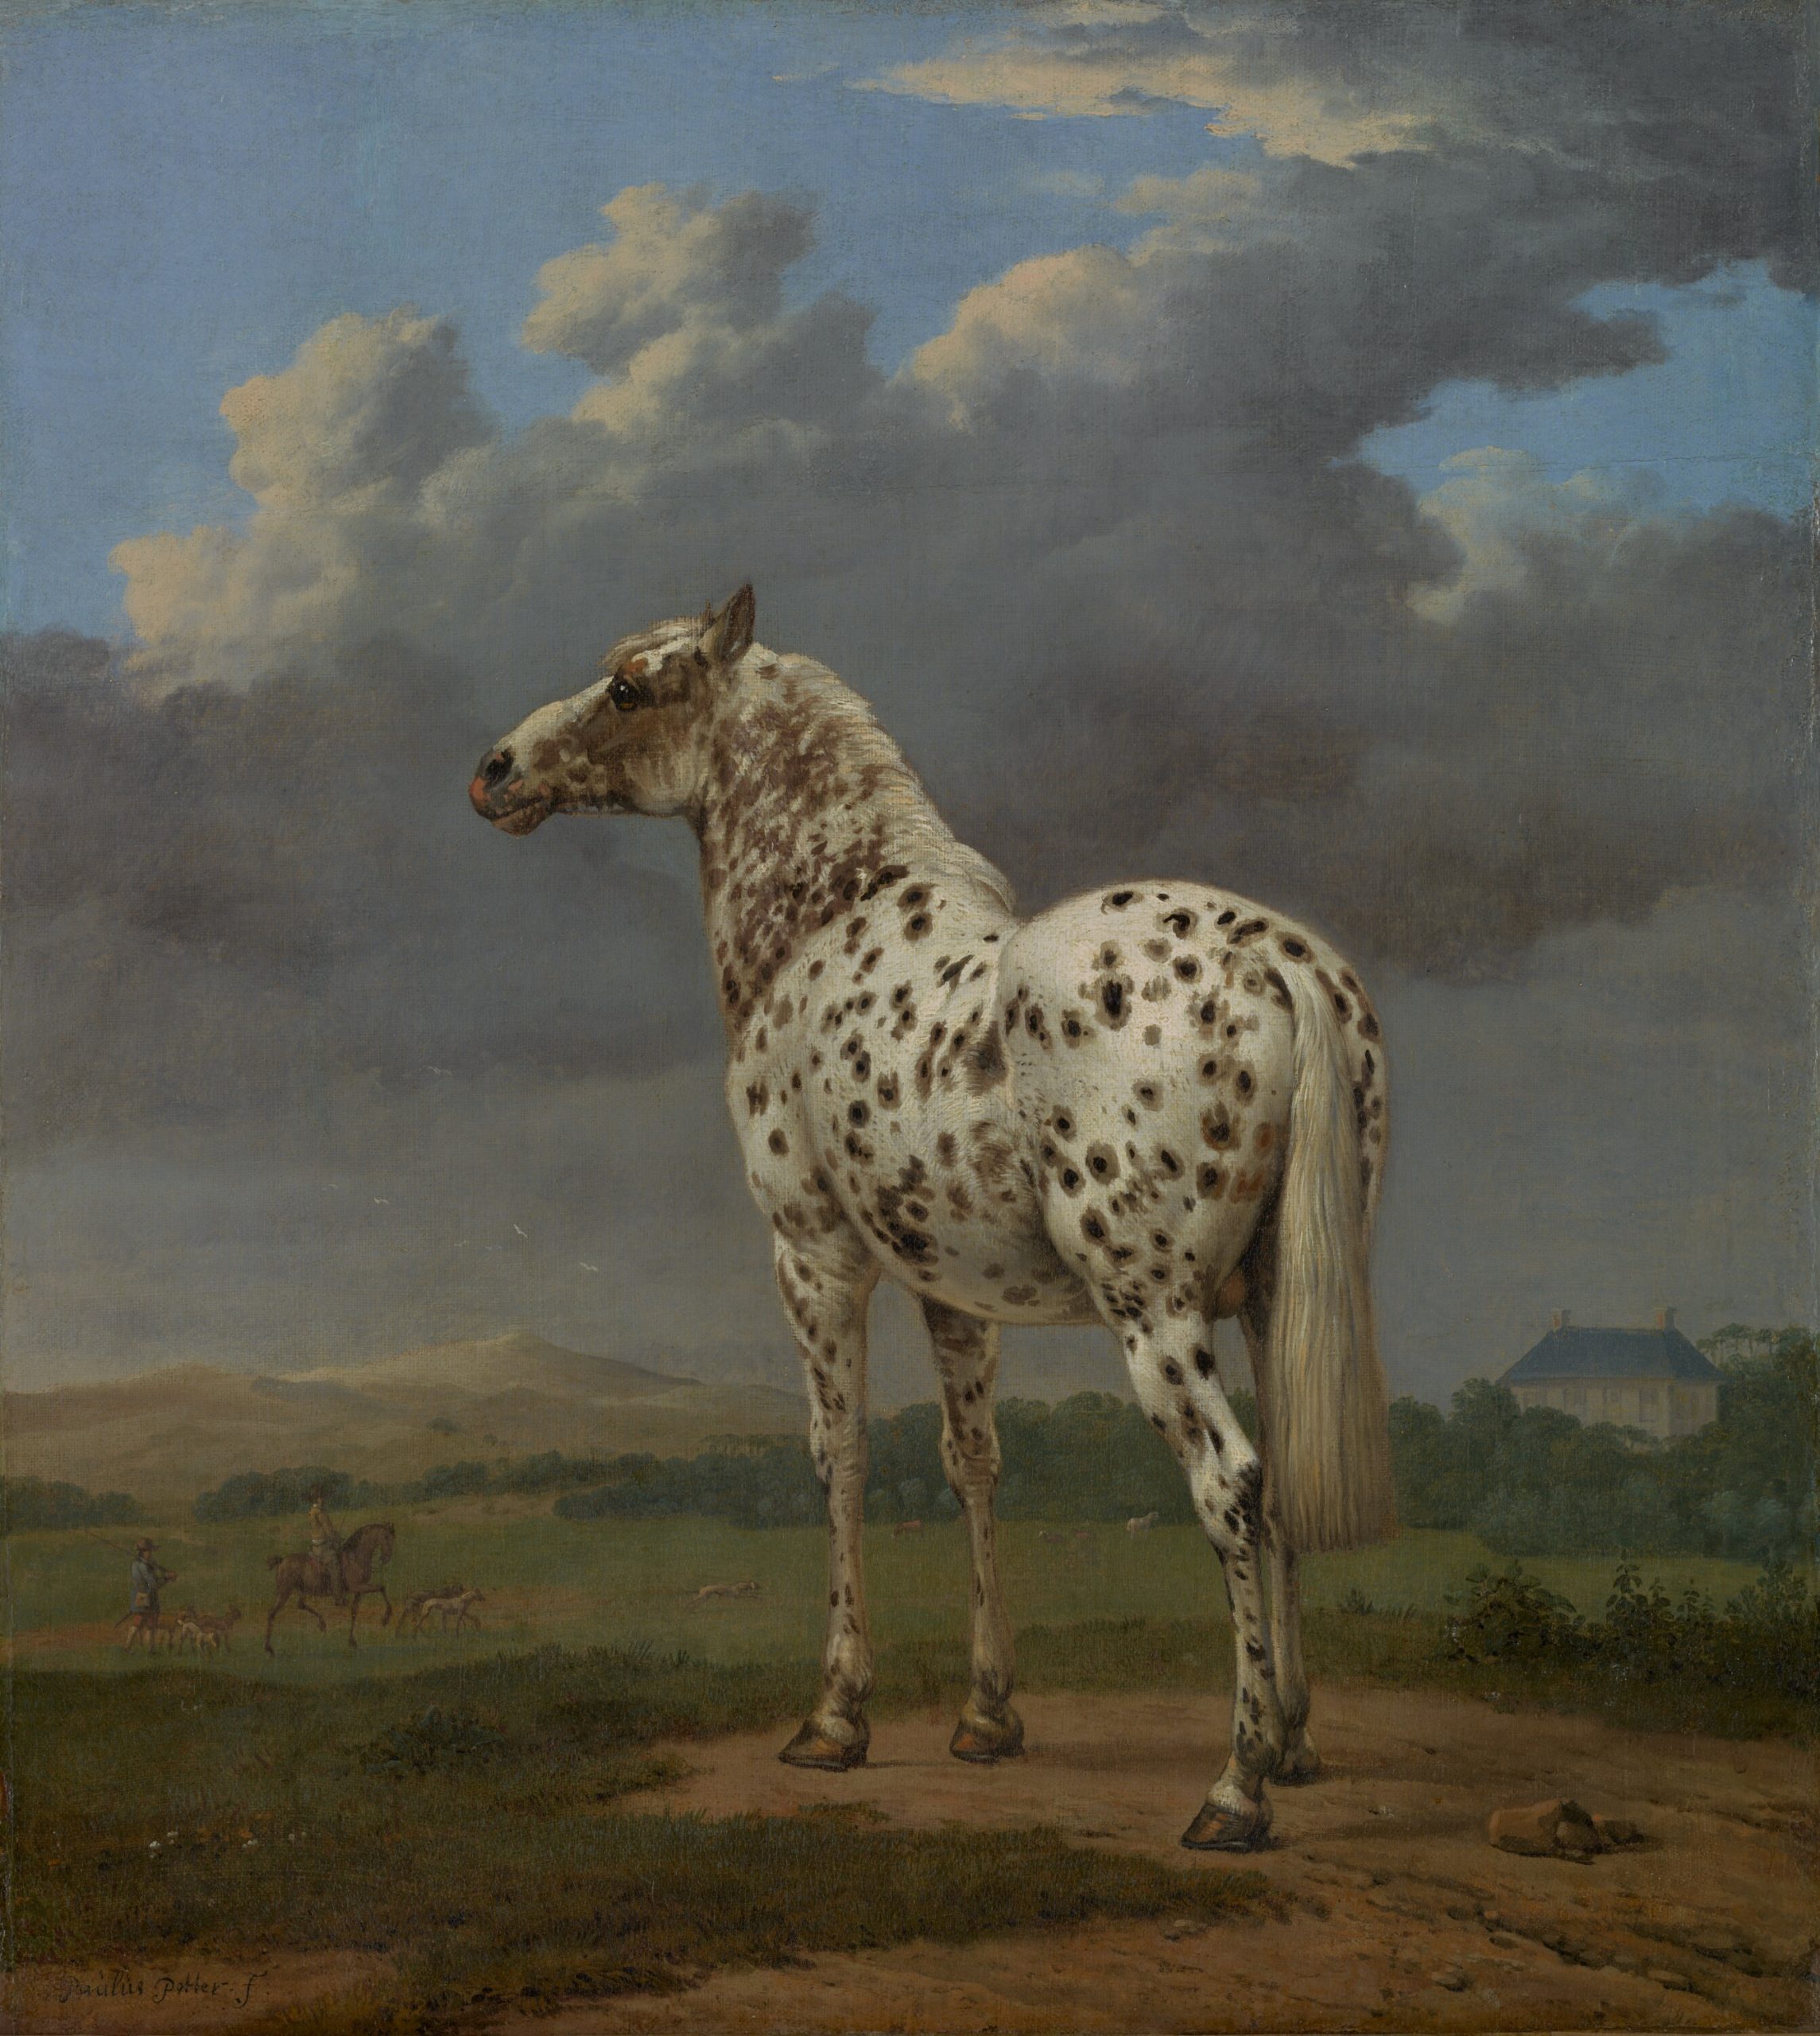 A still image of the back of a horse looking out to a vast field under a clouded sky.